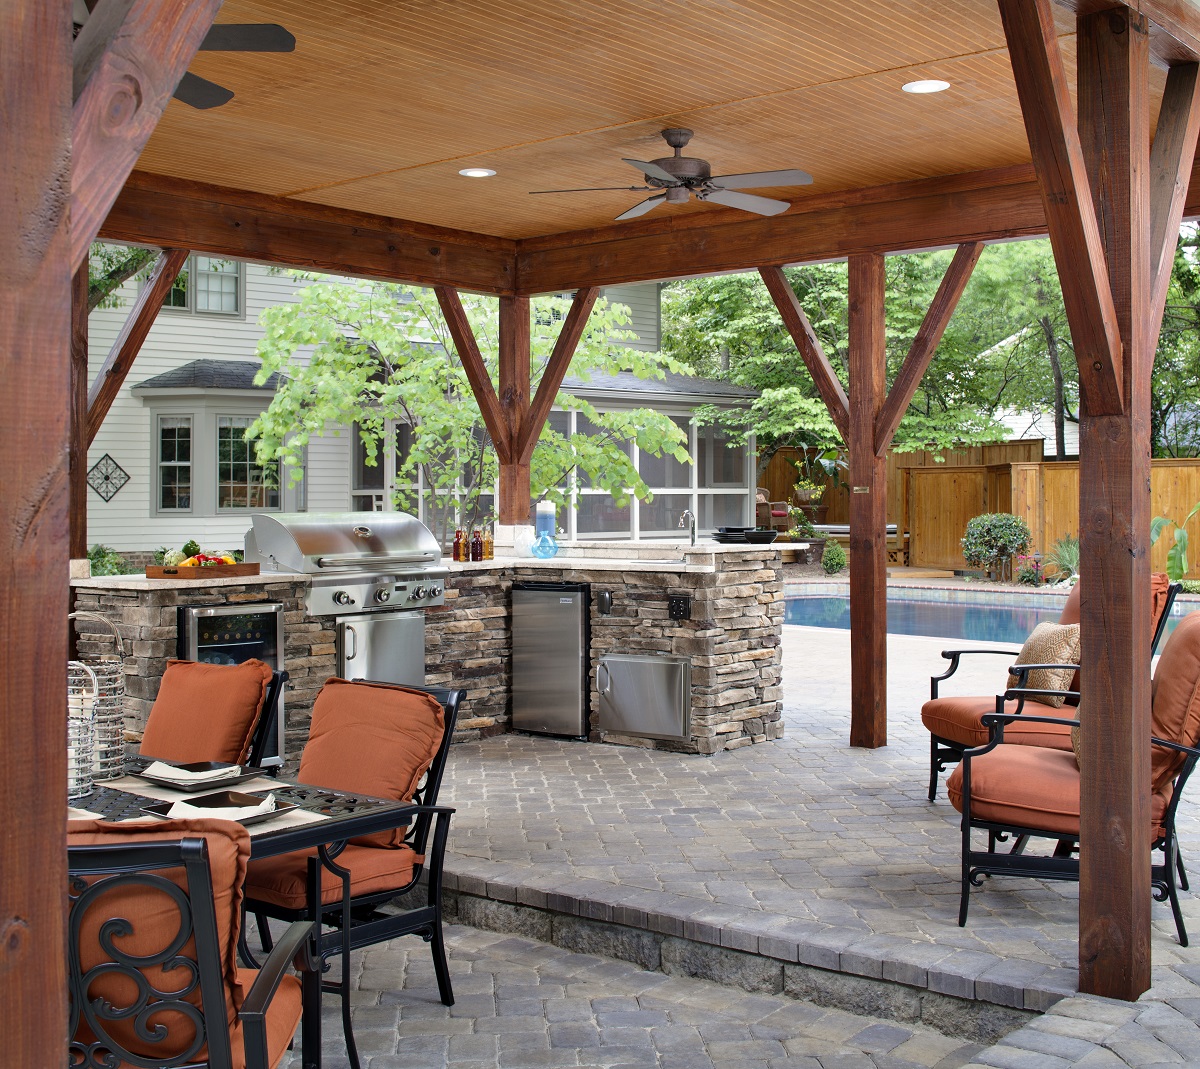 We can cook up an amazing custom patio and outdoor kitchen design just for you